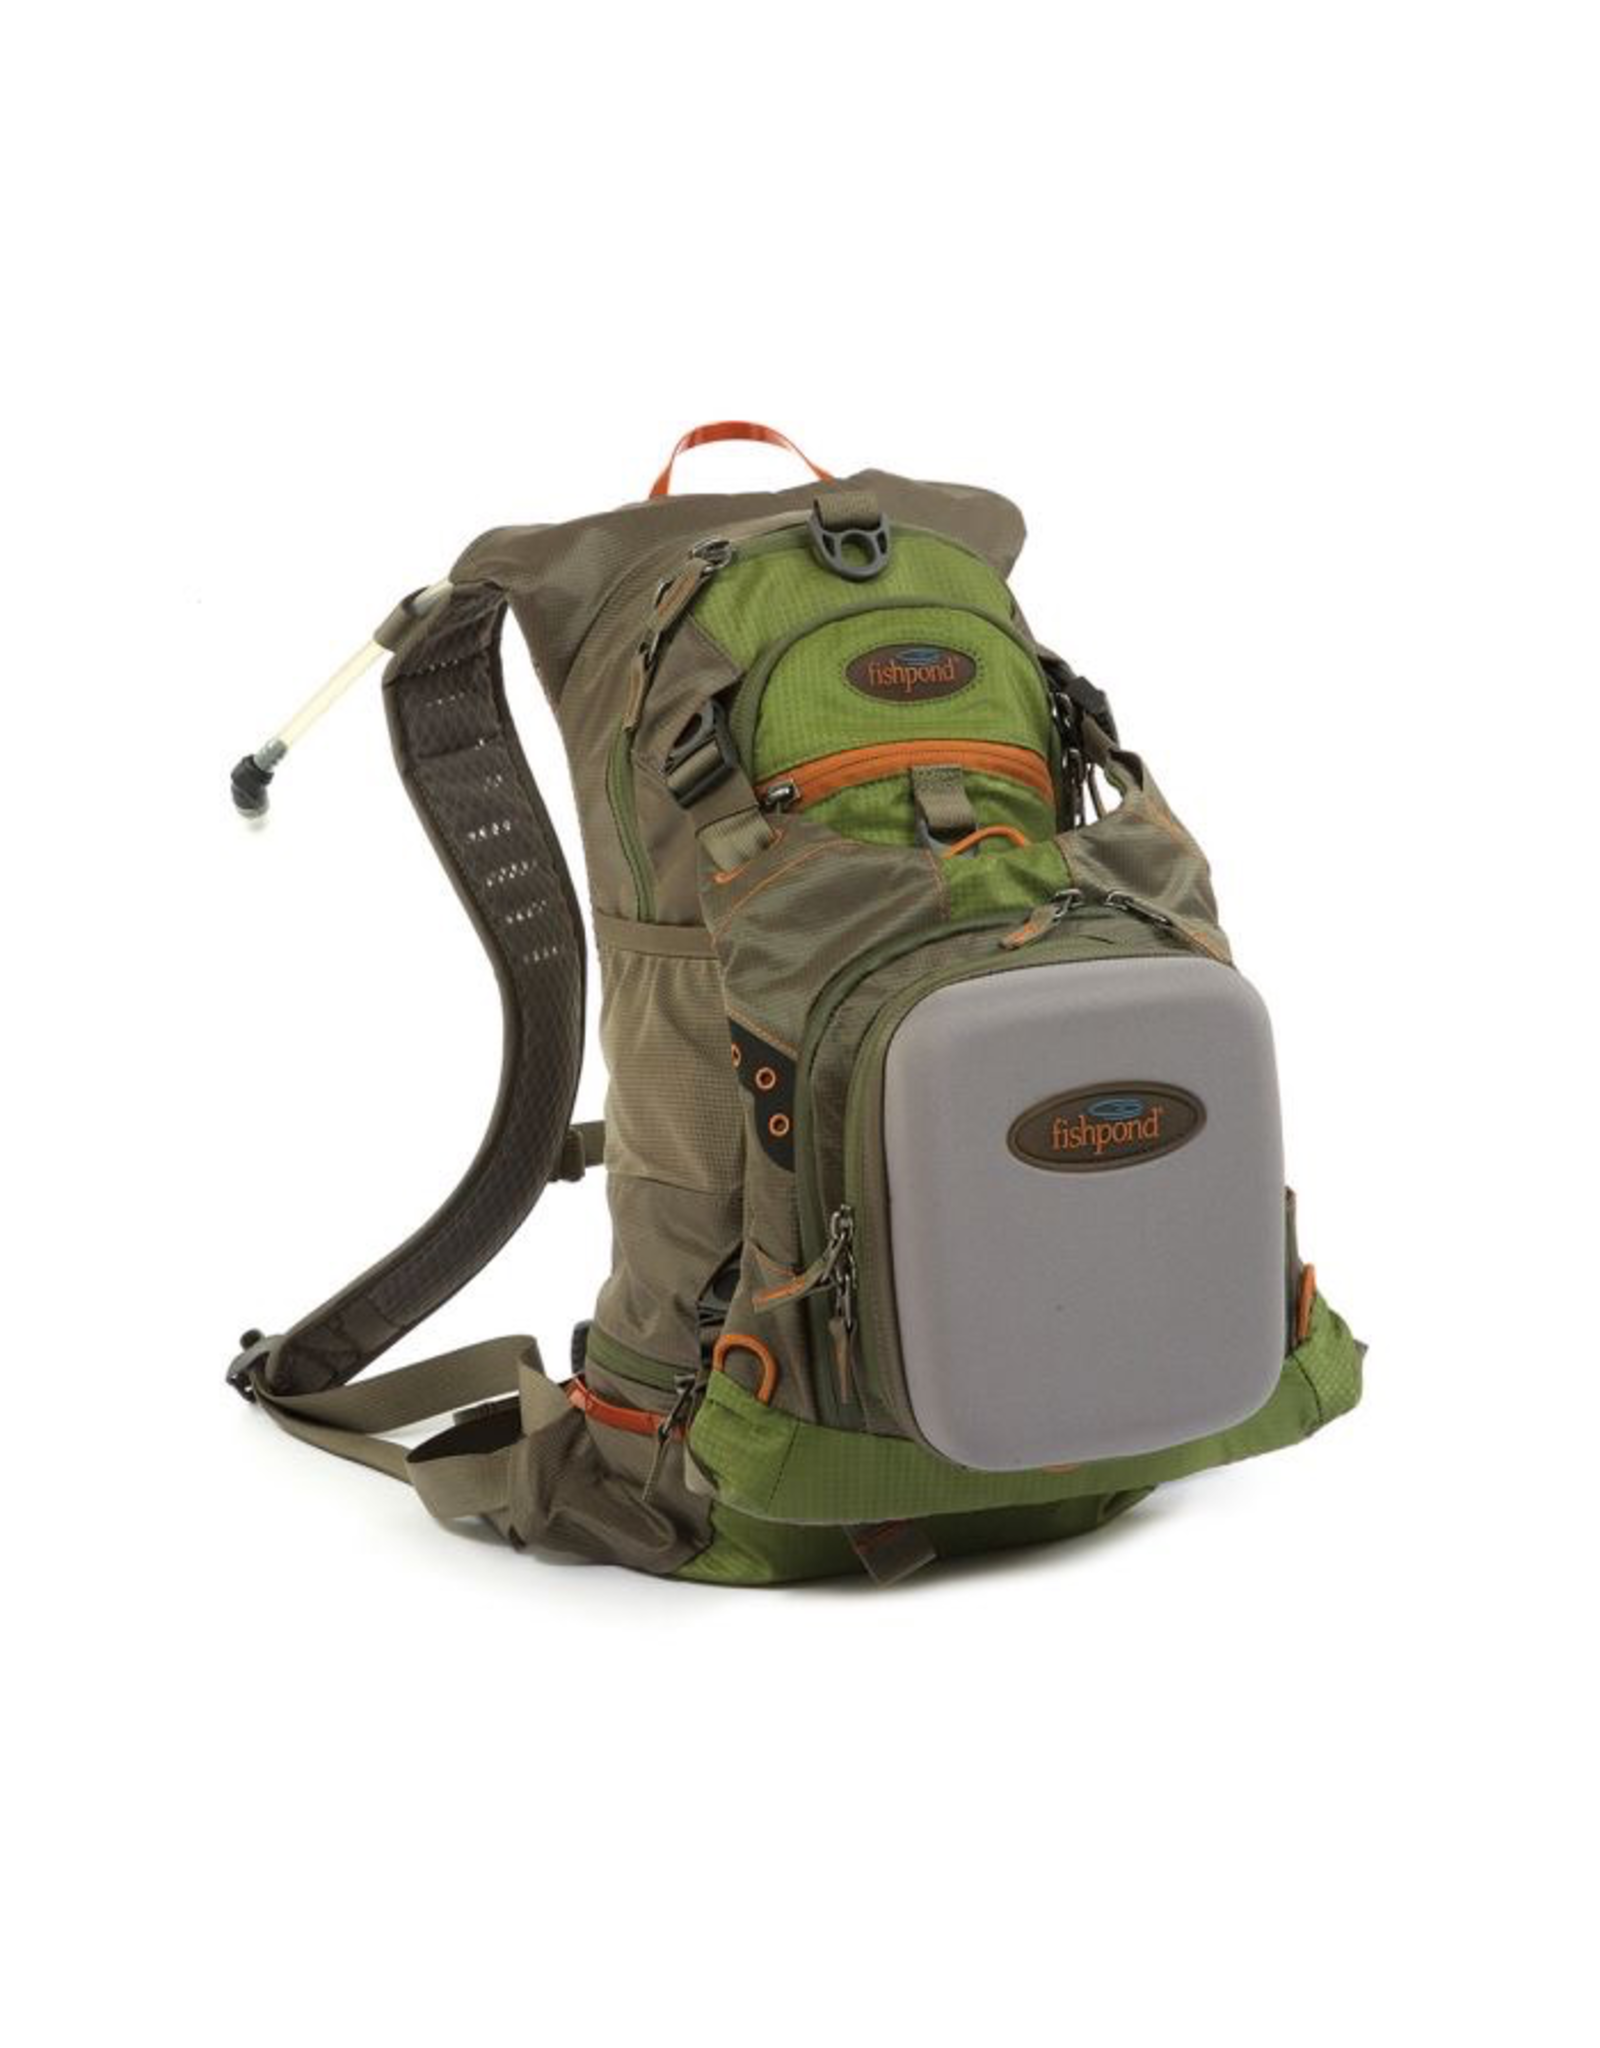 Fishpond Oxbow Chest/Backpack